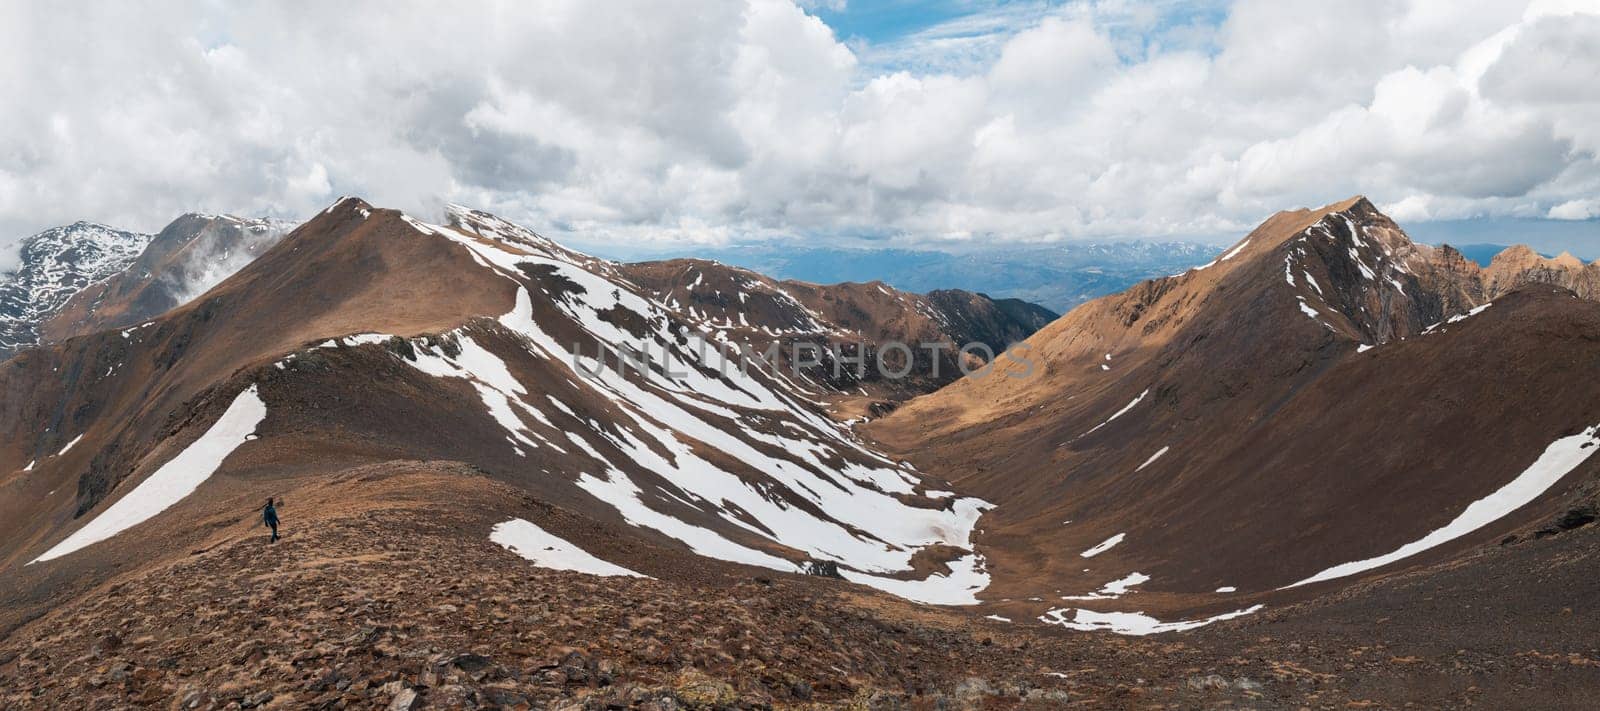 Panoramic beautiful view of the steep snowy slopes on an autumn day in the Pyrenees mountains on a cloudy sky. The concept of Spanish national mountain parks. Copyspace.